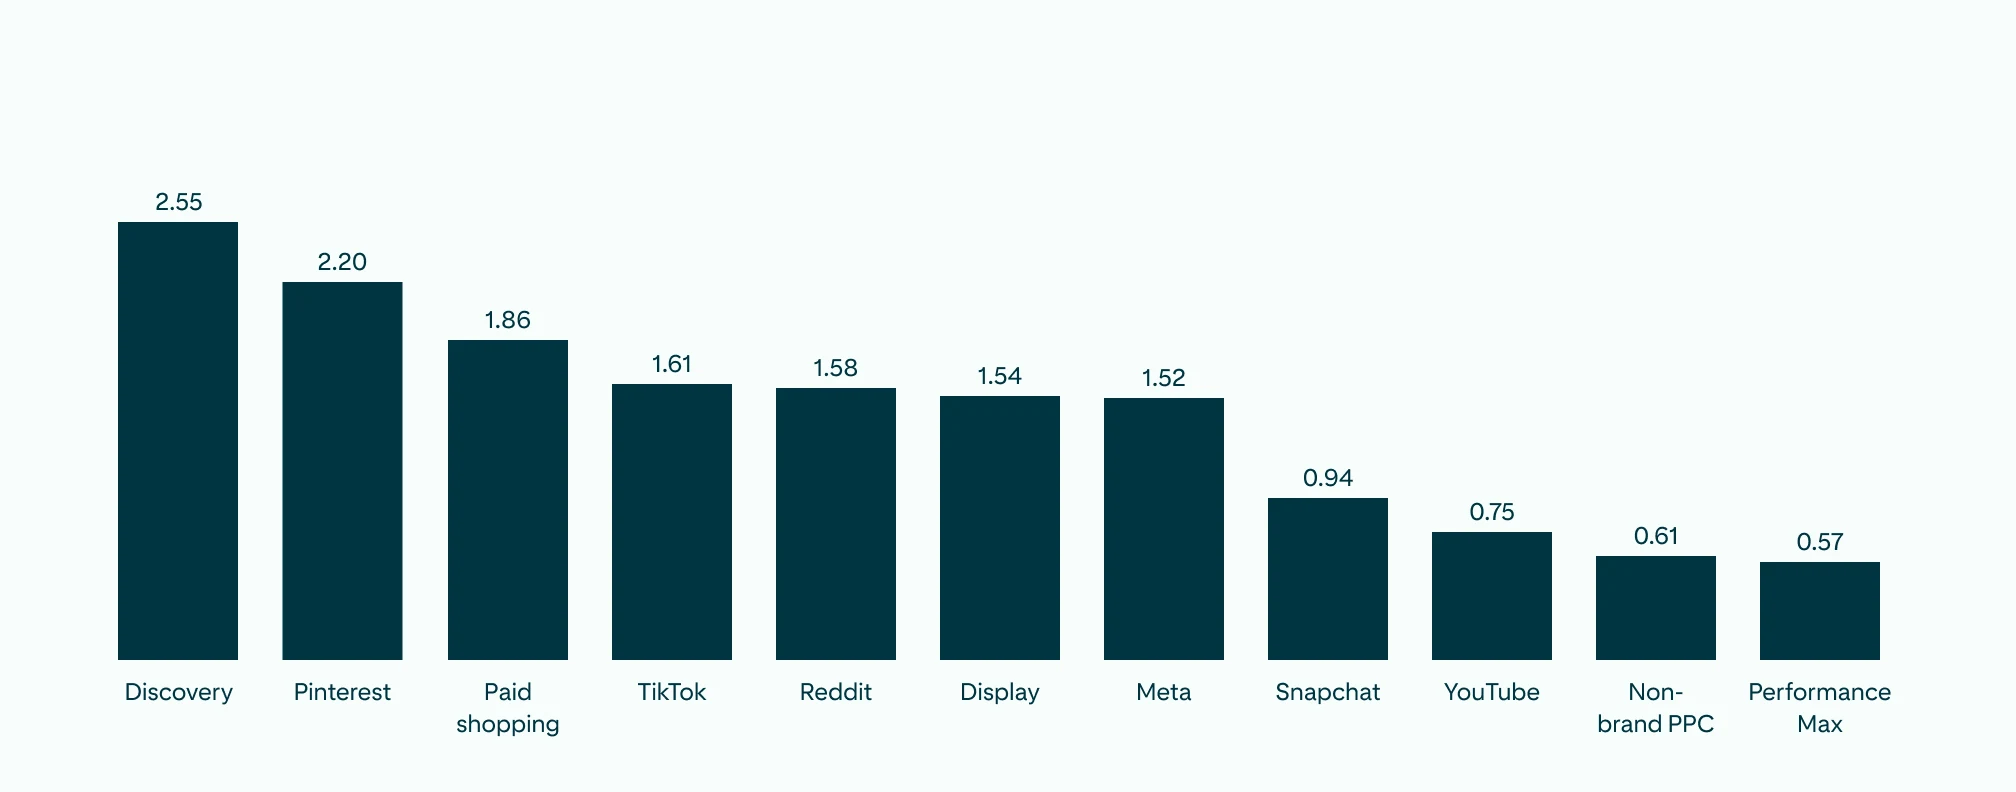    Bar graph showing R O A S for all social media channels where Pinterest stands out amongst others, only slightly behind Discovery.